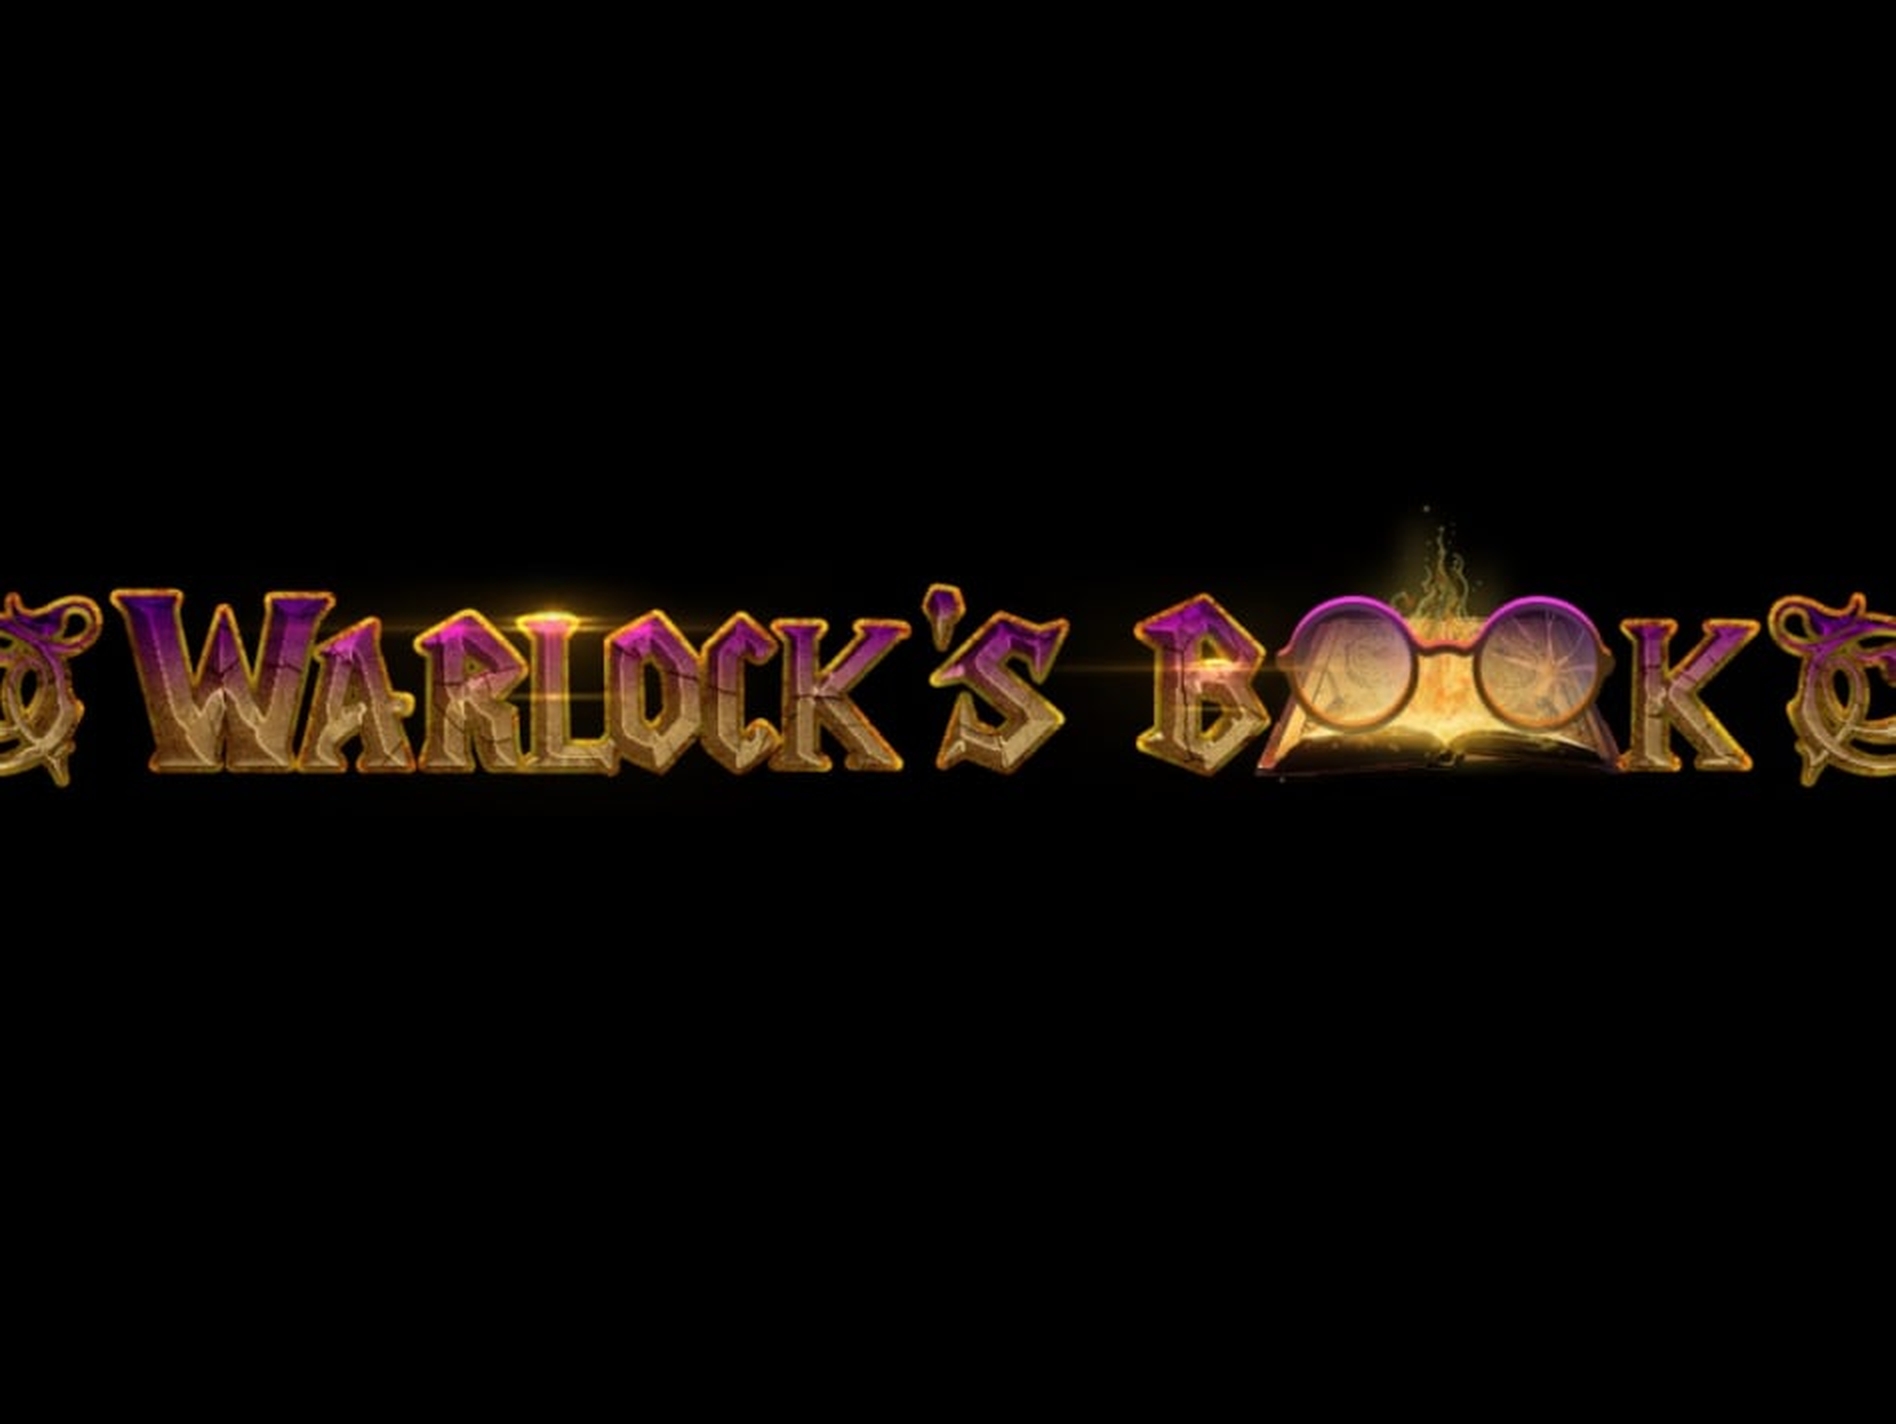 The Warlock's Book Online Slot Demo Game by Fugaso